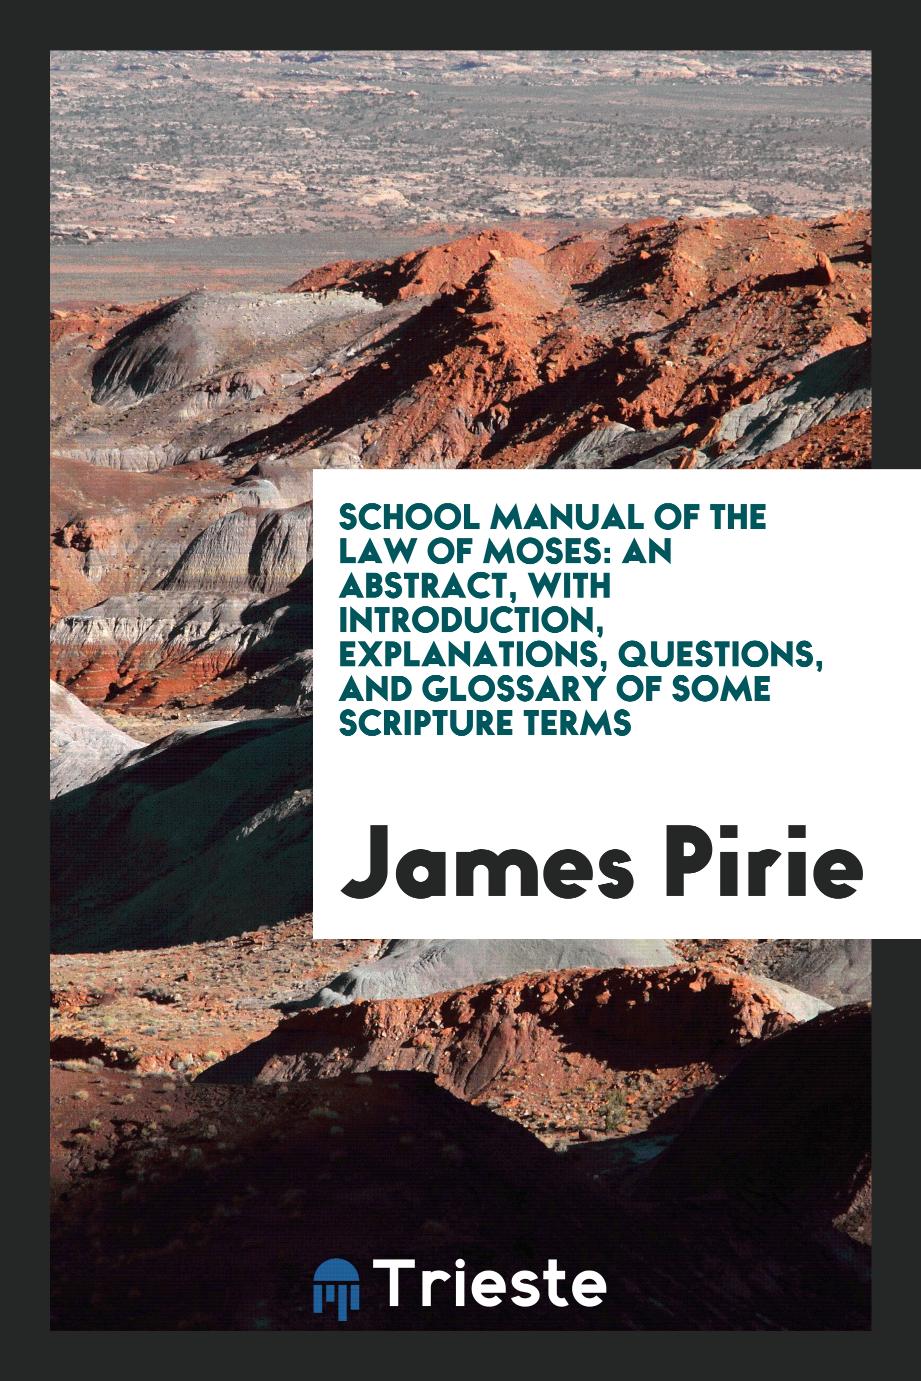 School Manual of the Law of Moses: An Abstract, with Introduction, Explanations, Questions, and Glossary of Some Scripture Terms